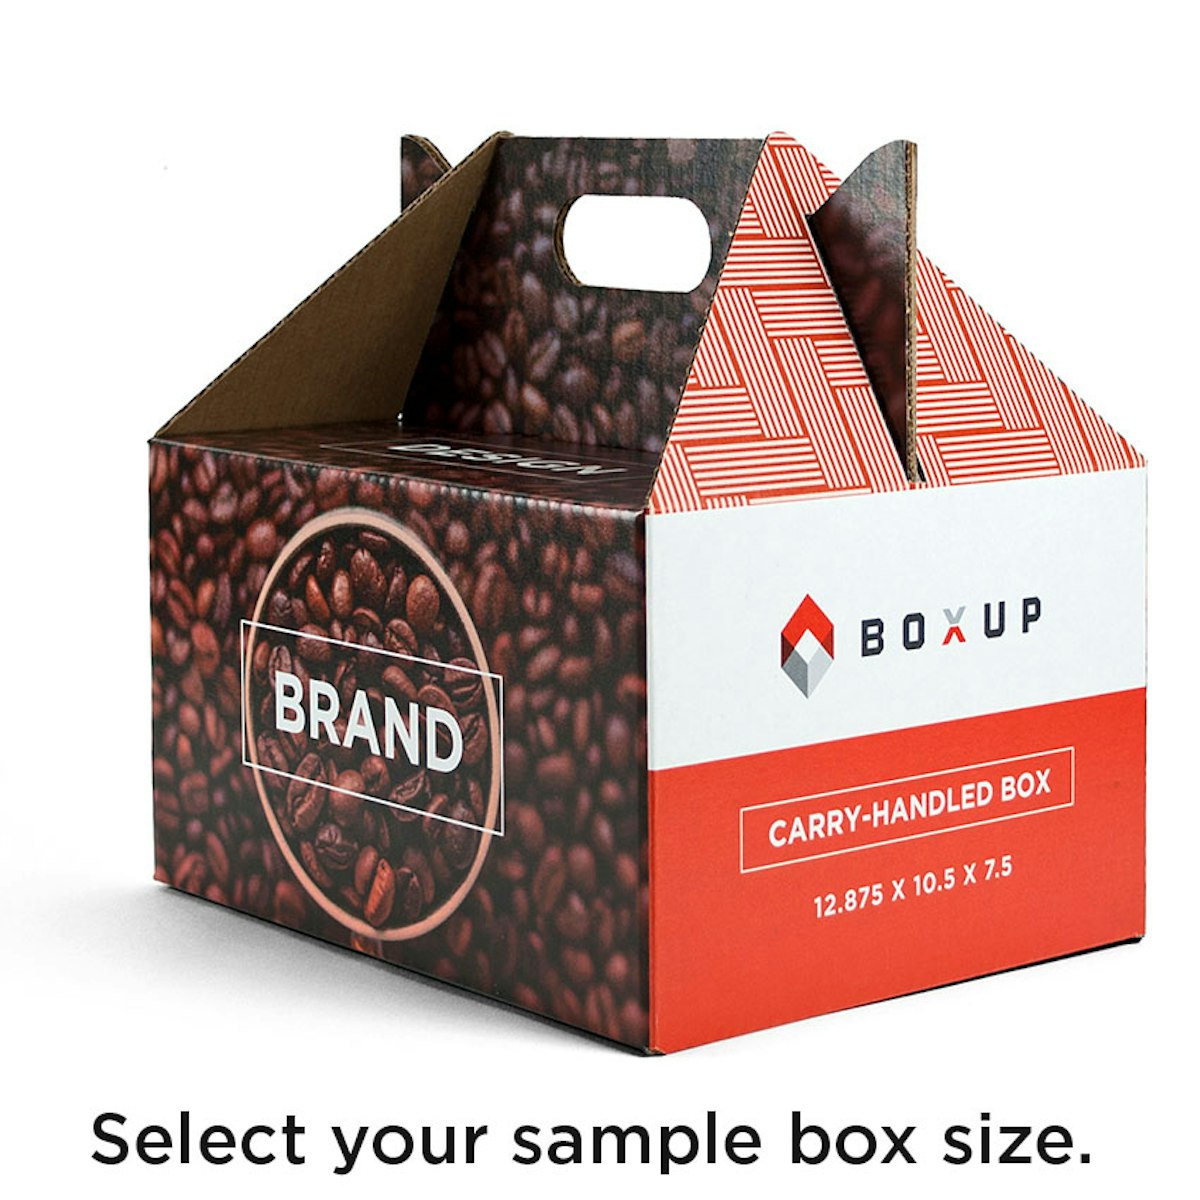 Product sample boxes